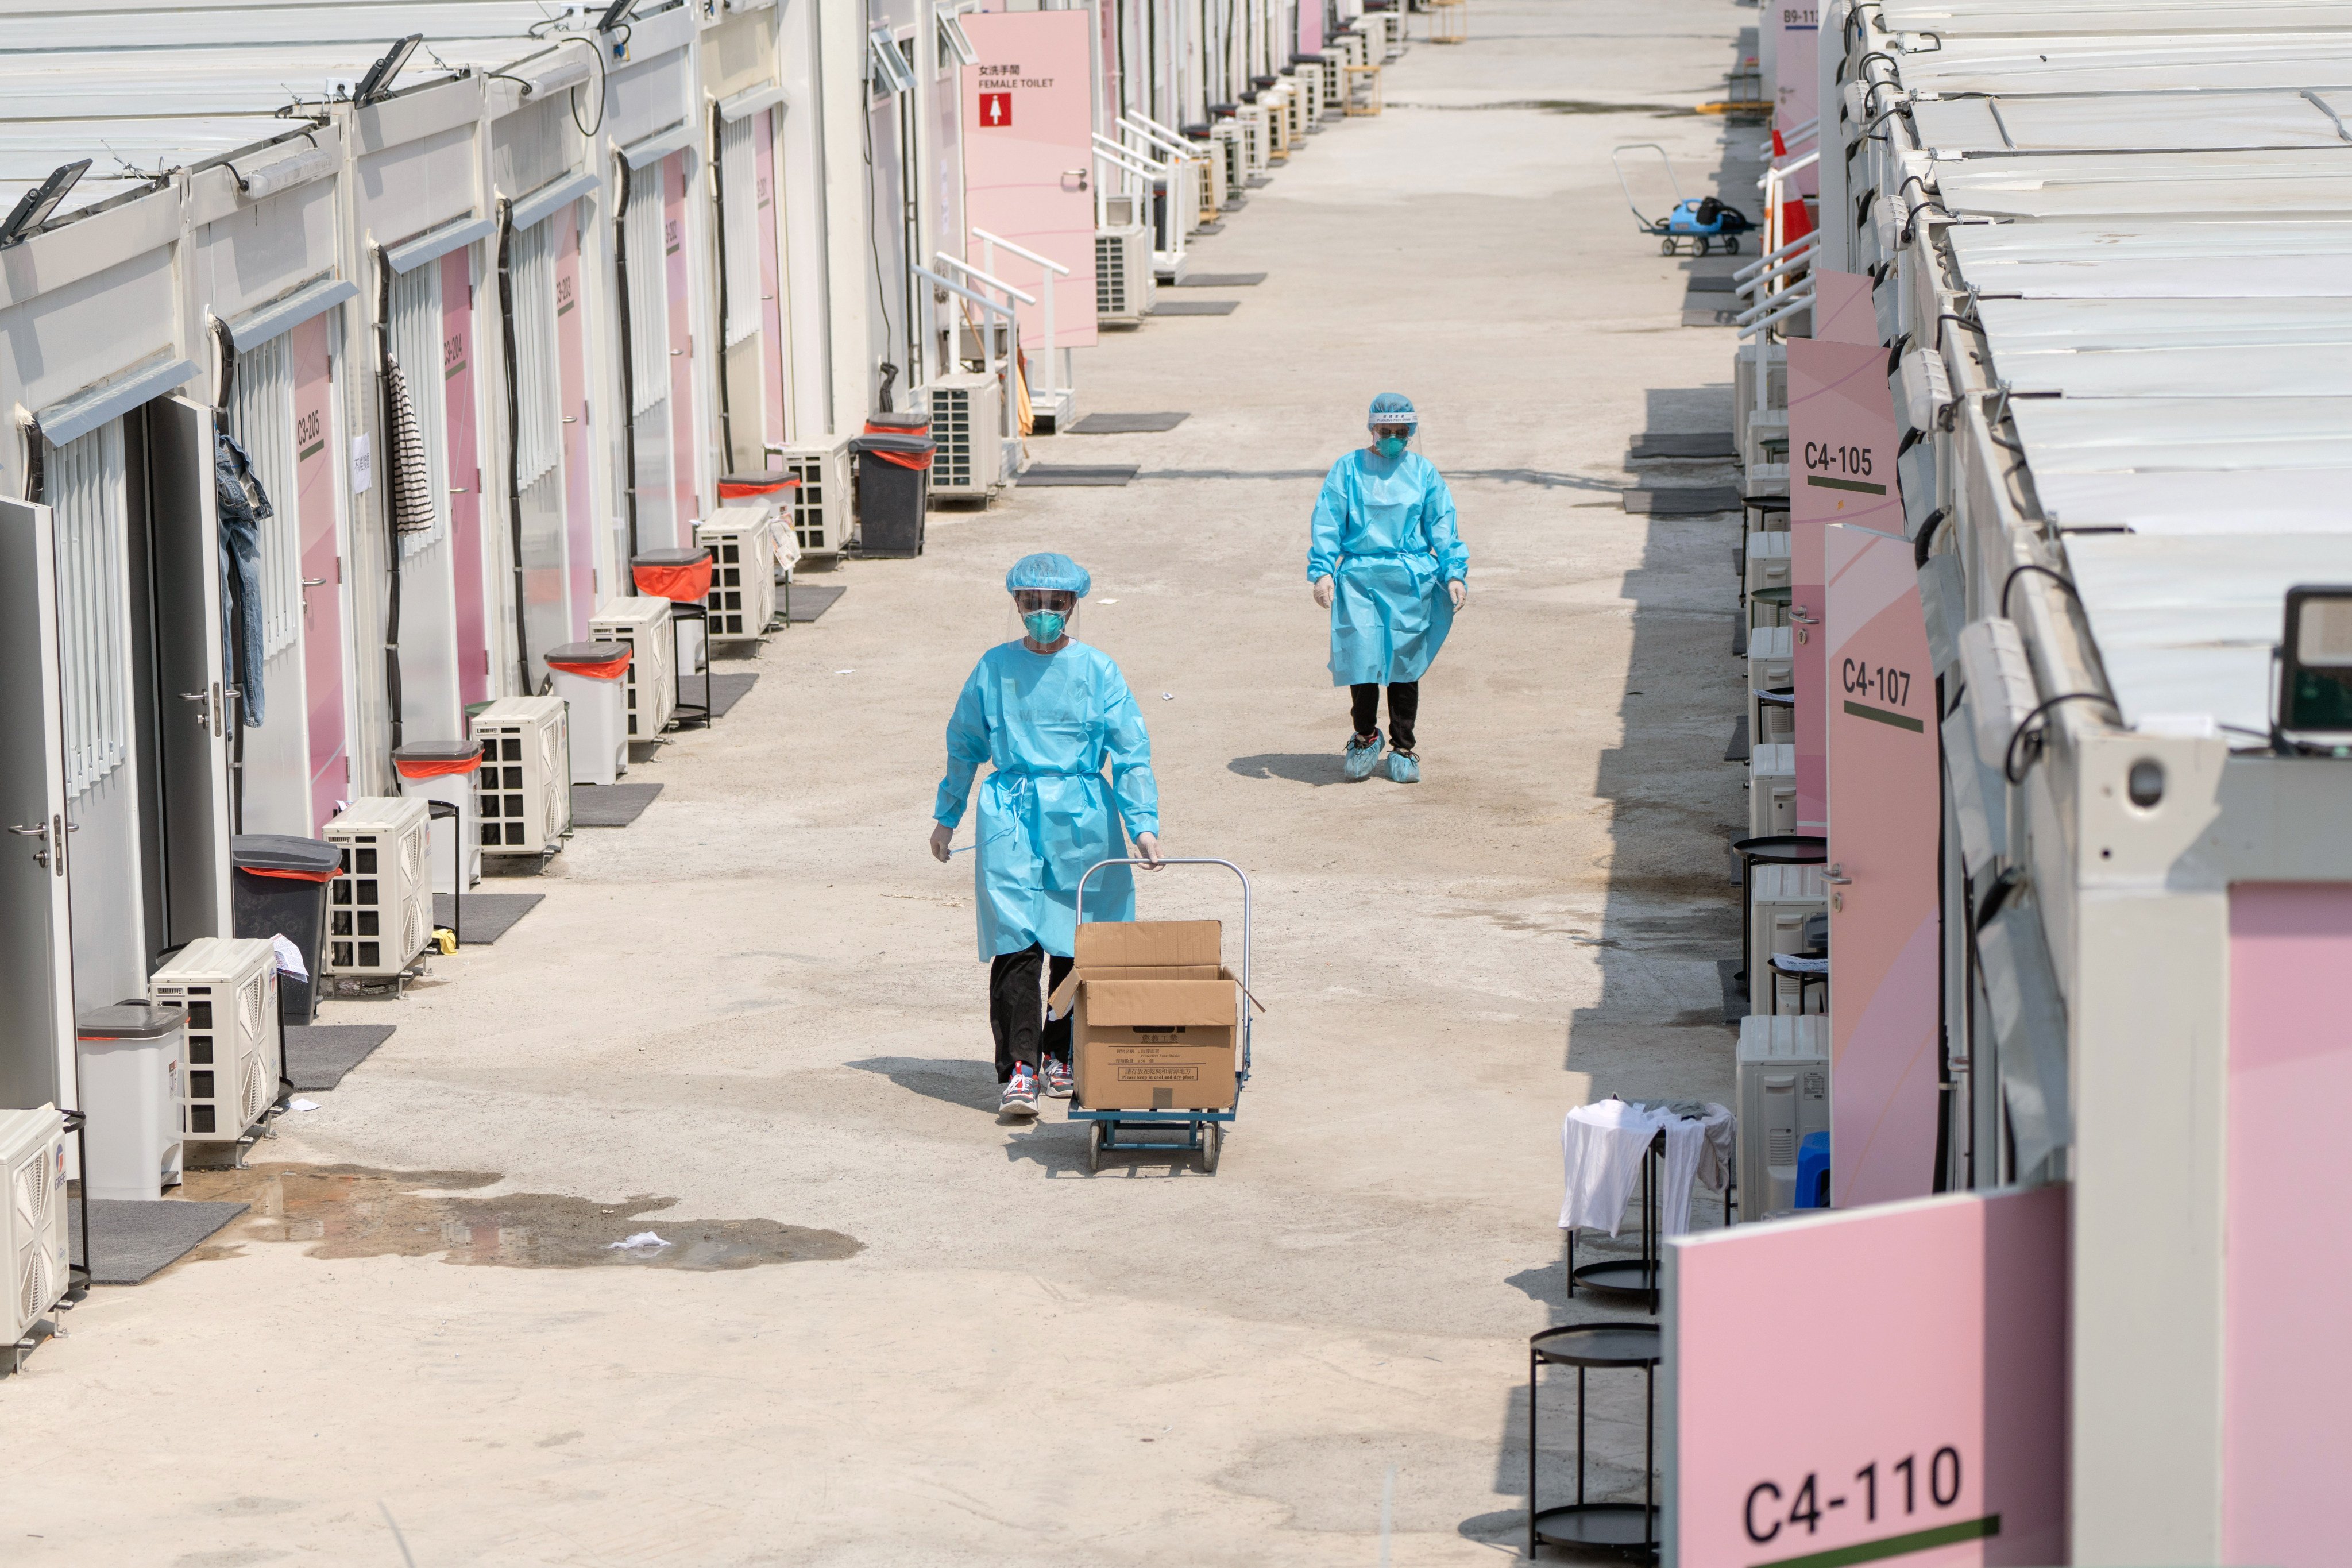 Health care workers in protective gear are seen at a Covid-19 isolation facility in Hong Kong on Tuesday. Photo: Bloomberg